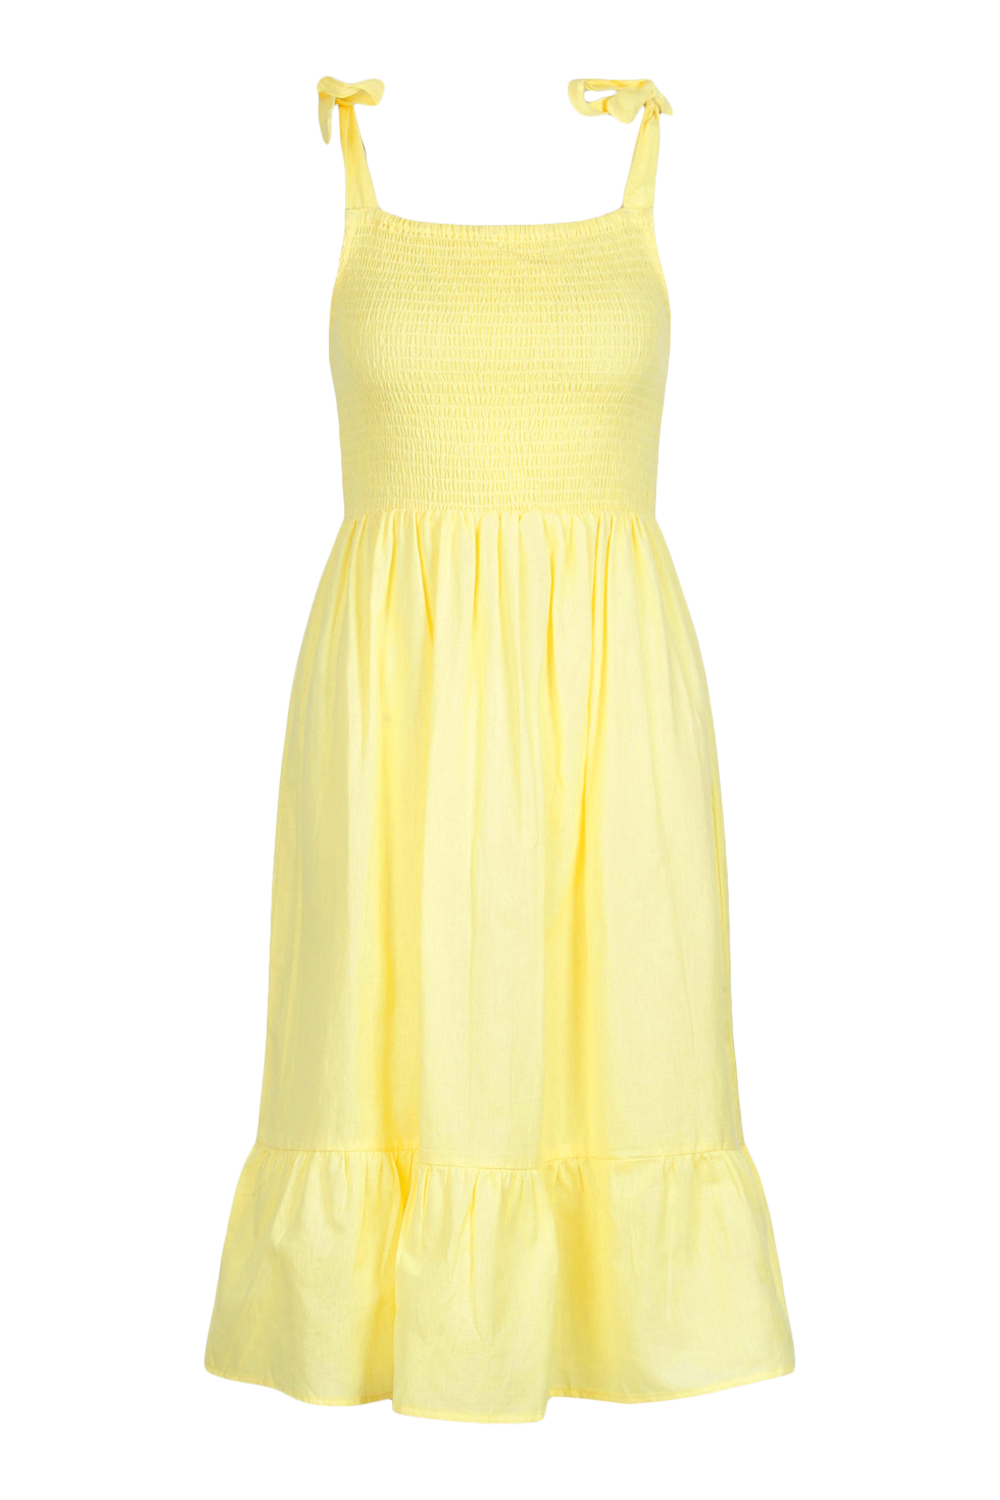 Womens Clothing Dresses Casual and day dresses Boohoo Tie Strap Shirred Bust Cotton Midi Dress in Lemon Yellow 